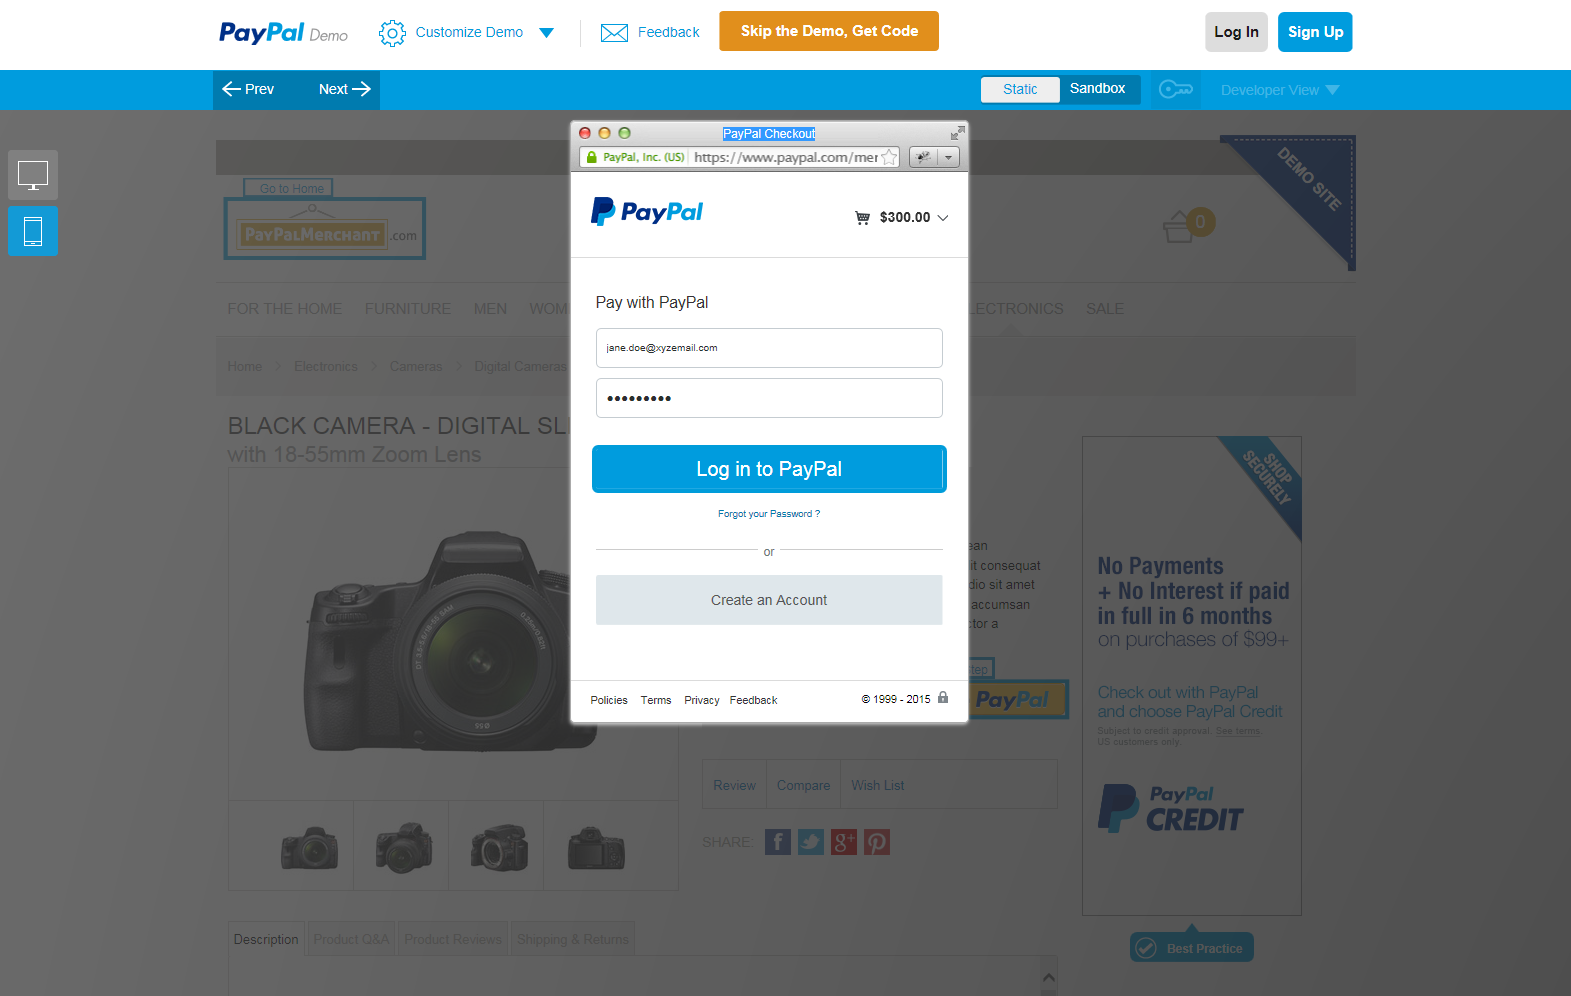 PayPal in-context checkout demo